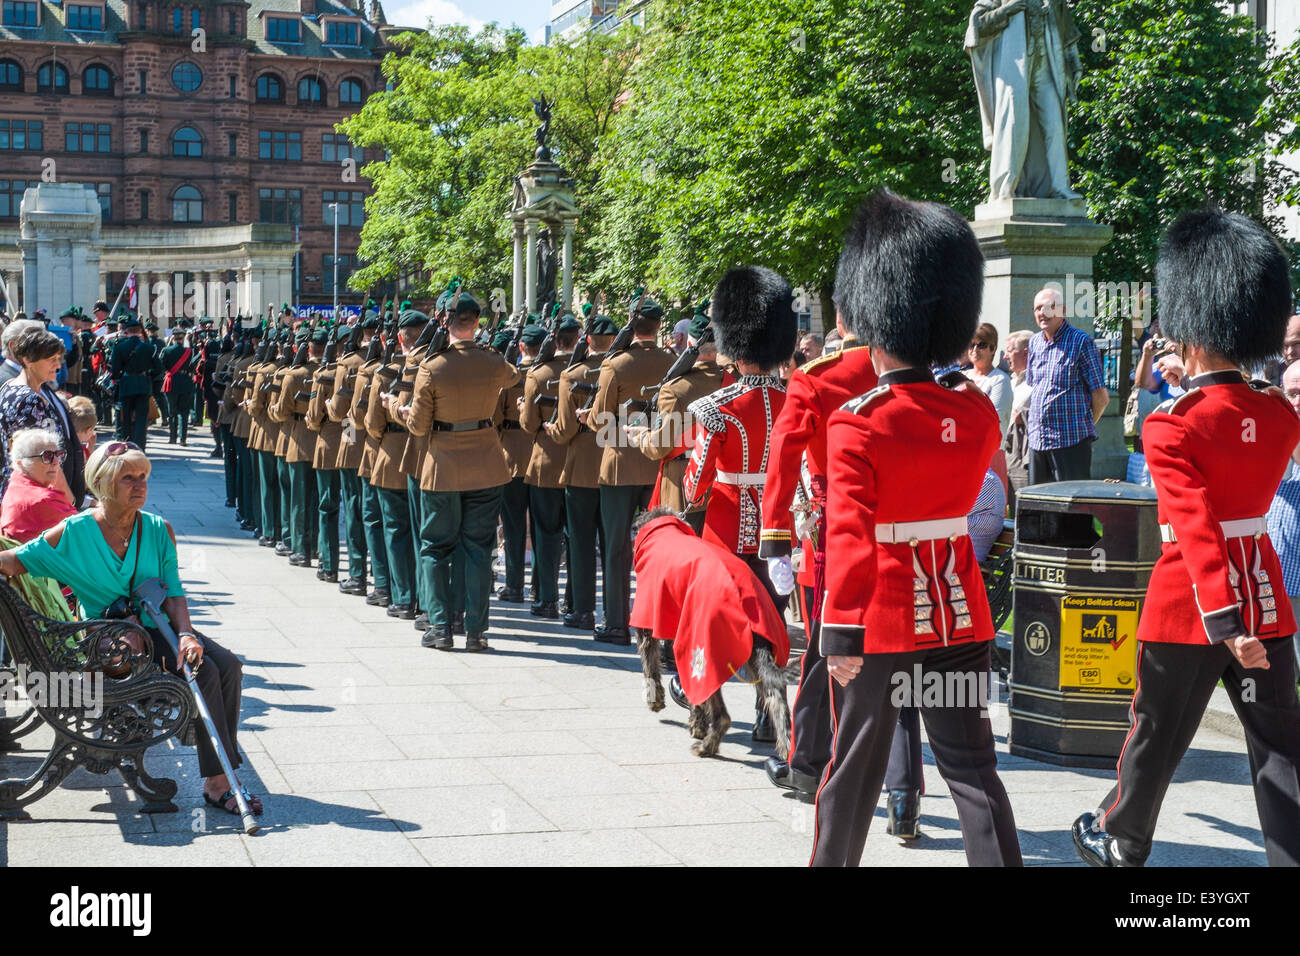 Commemorating the 98th anniversary of the Battle of the Somme at Belfast City Hall. Royal Irish Regiment on parade. Stock Photo